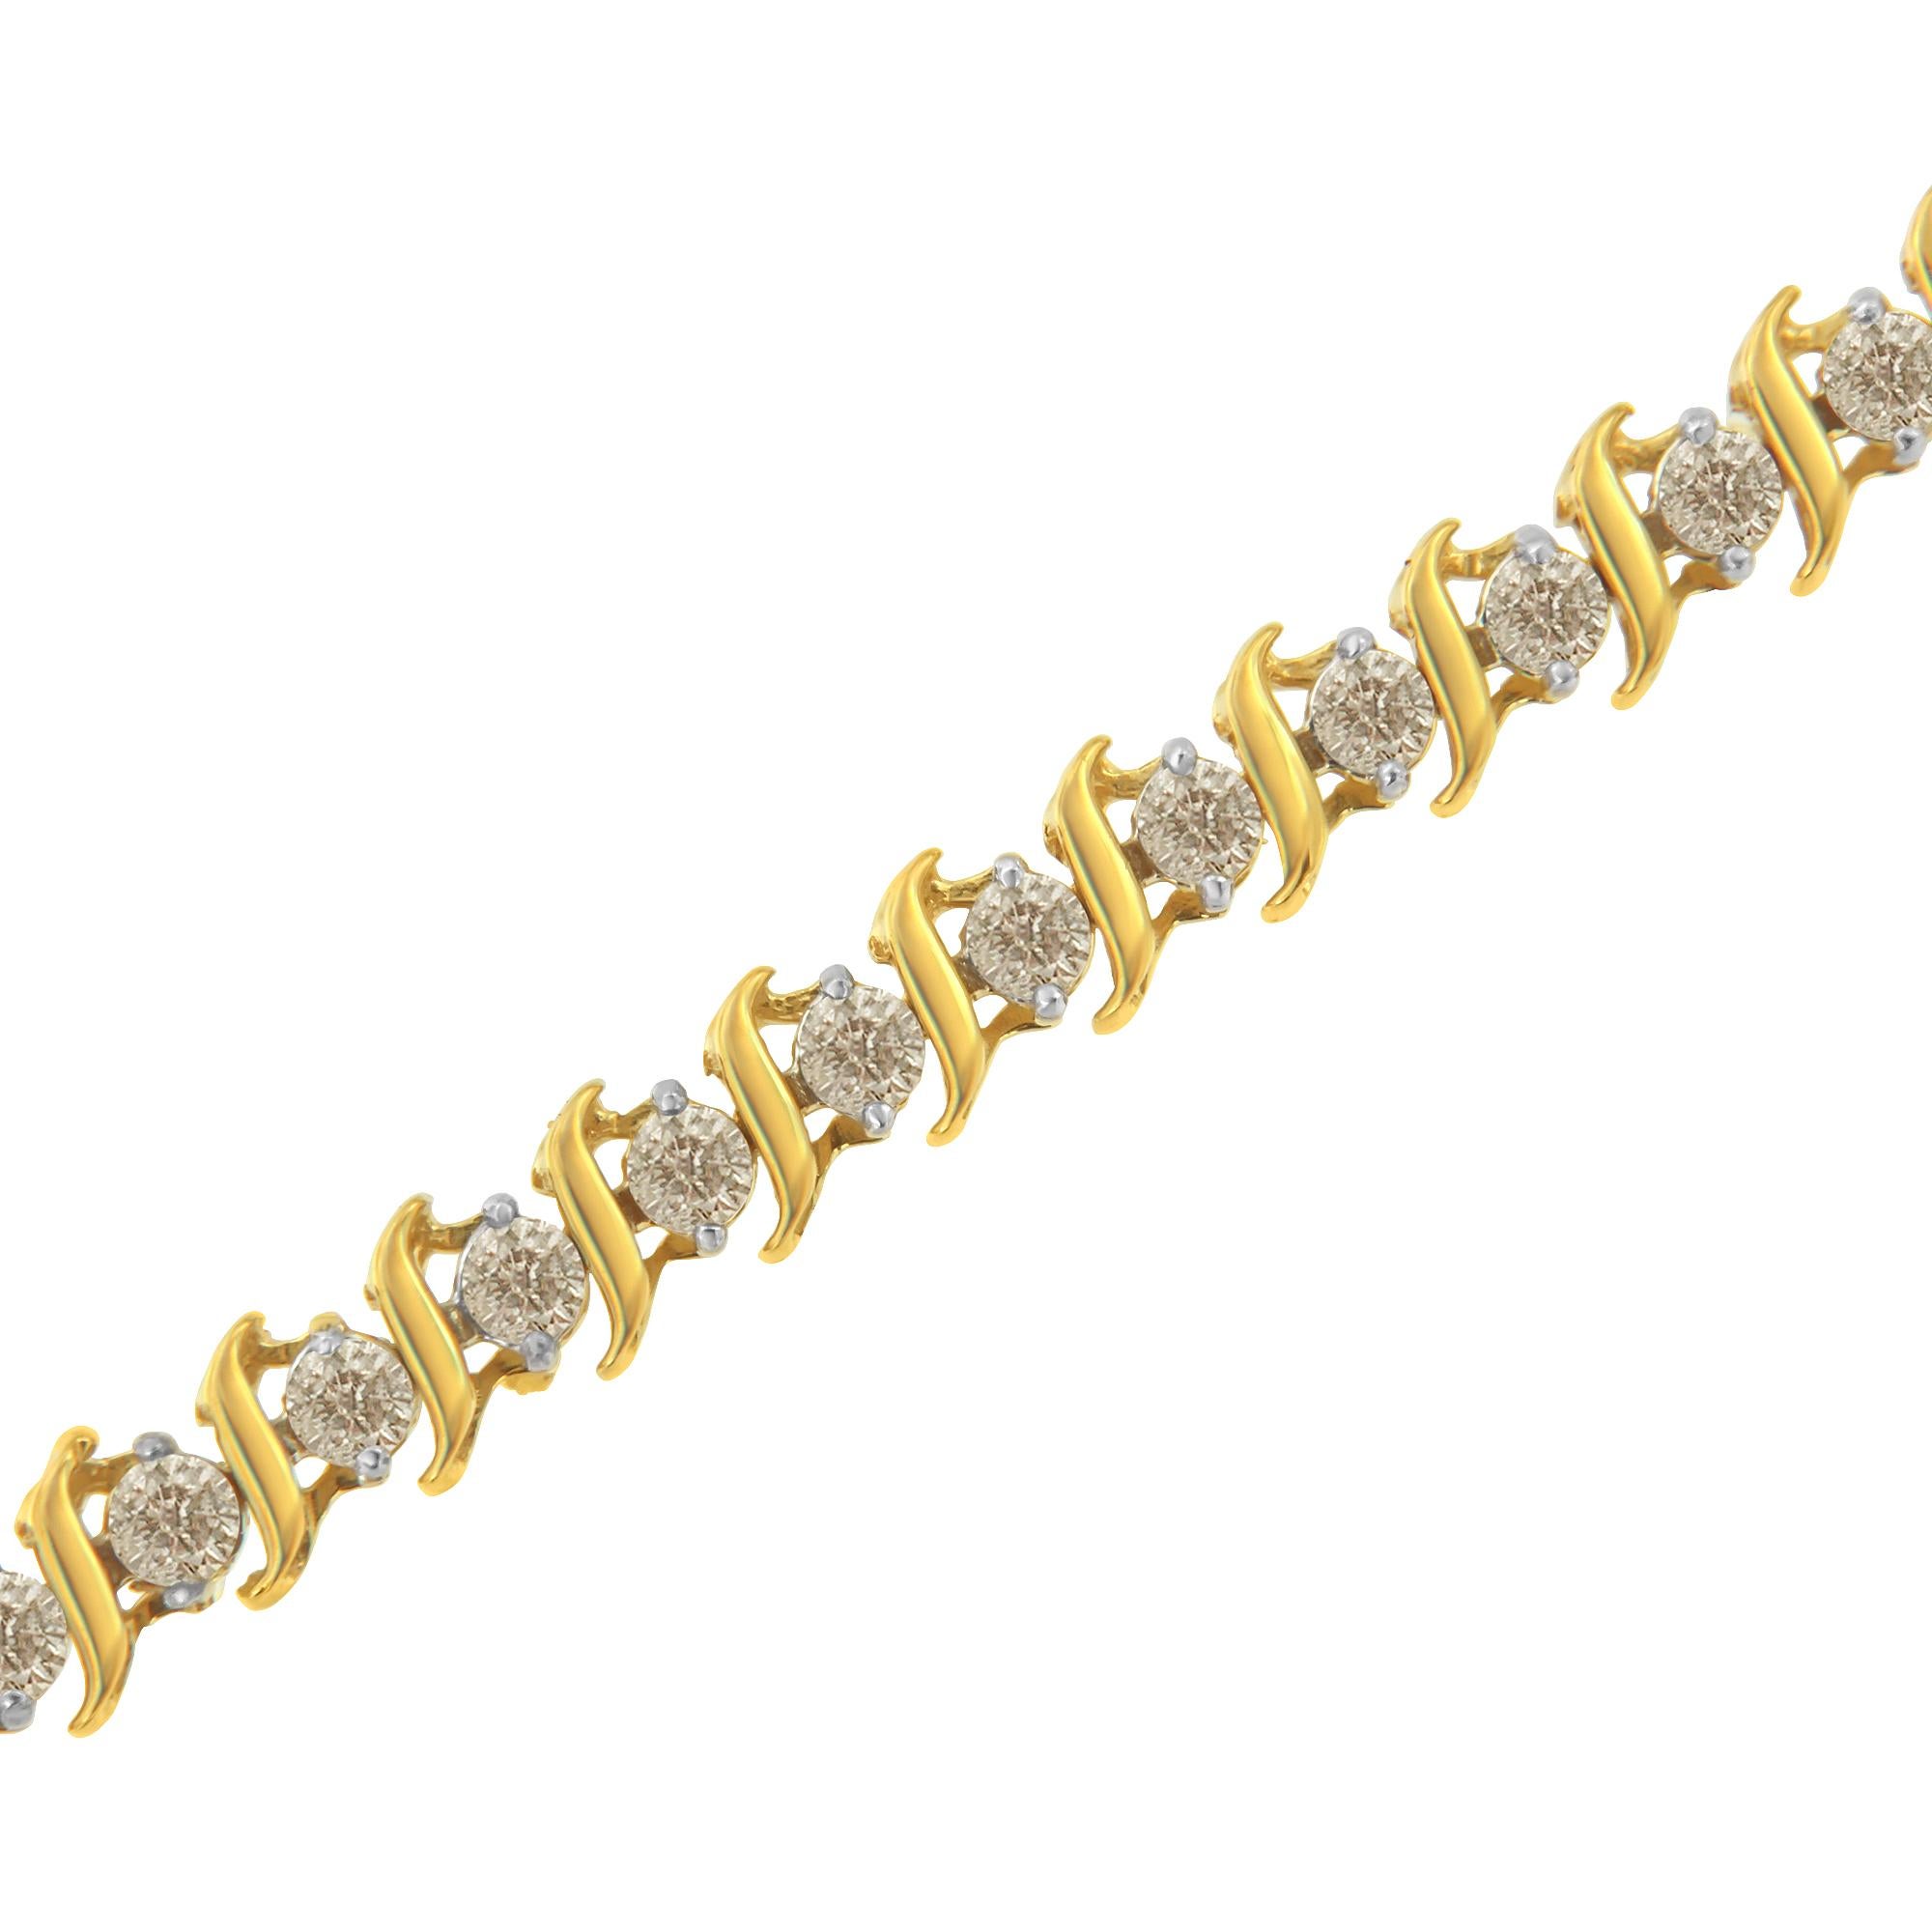 Elegant and timeless, this luxe tennis bracelet boasts an impressive 2.0 carat total weight of round cut diamonds. It features S shaped waves of 10K yellow gold alternated with round diamonds in two prong settings. The bracelet has a secure box with